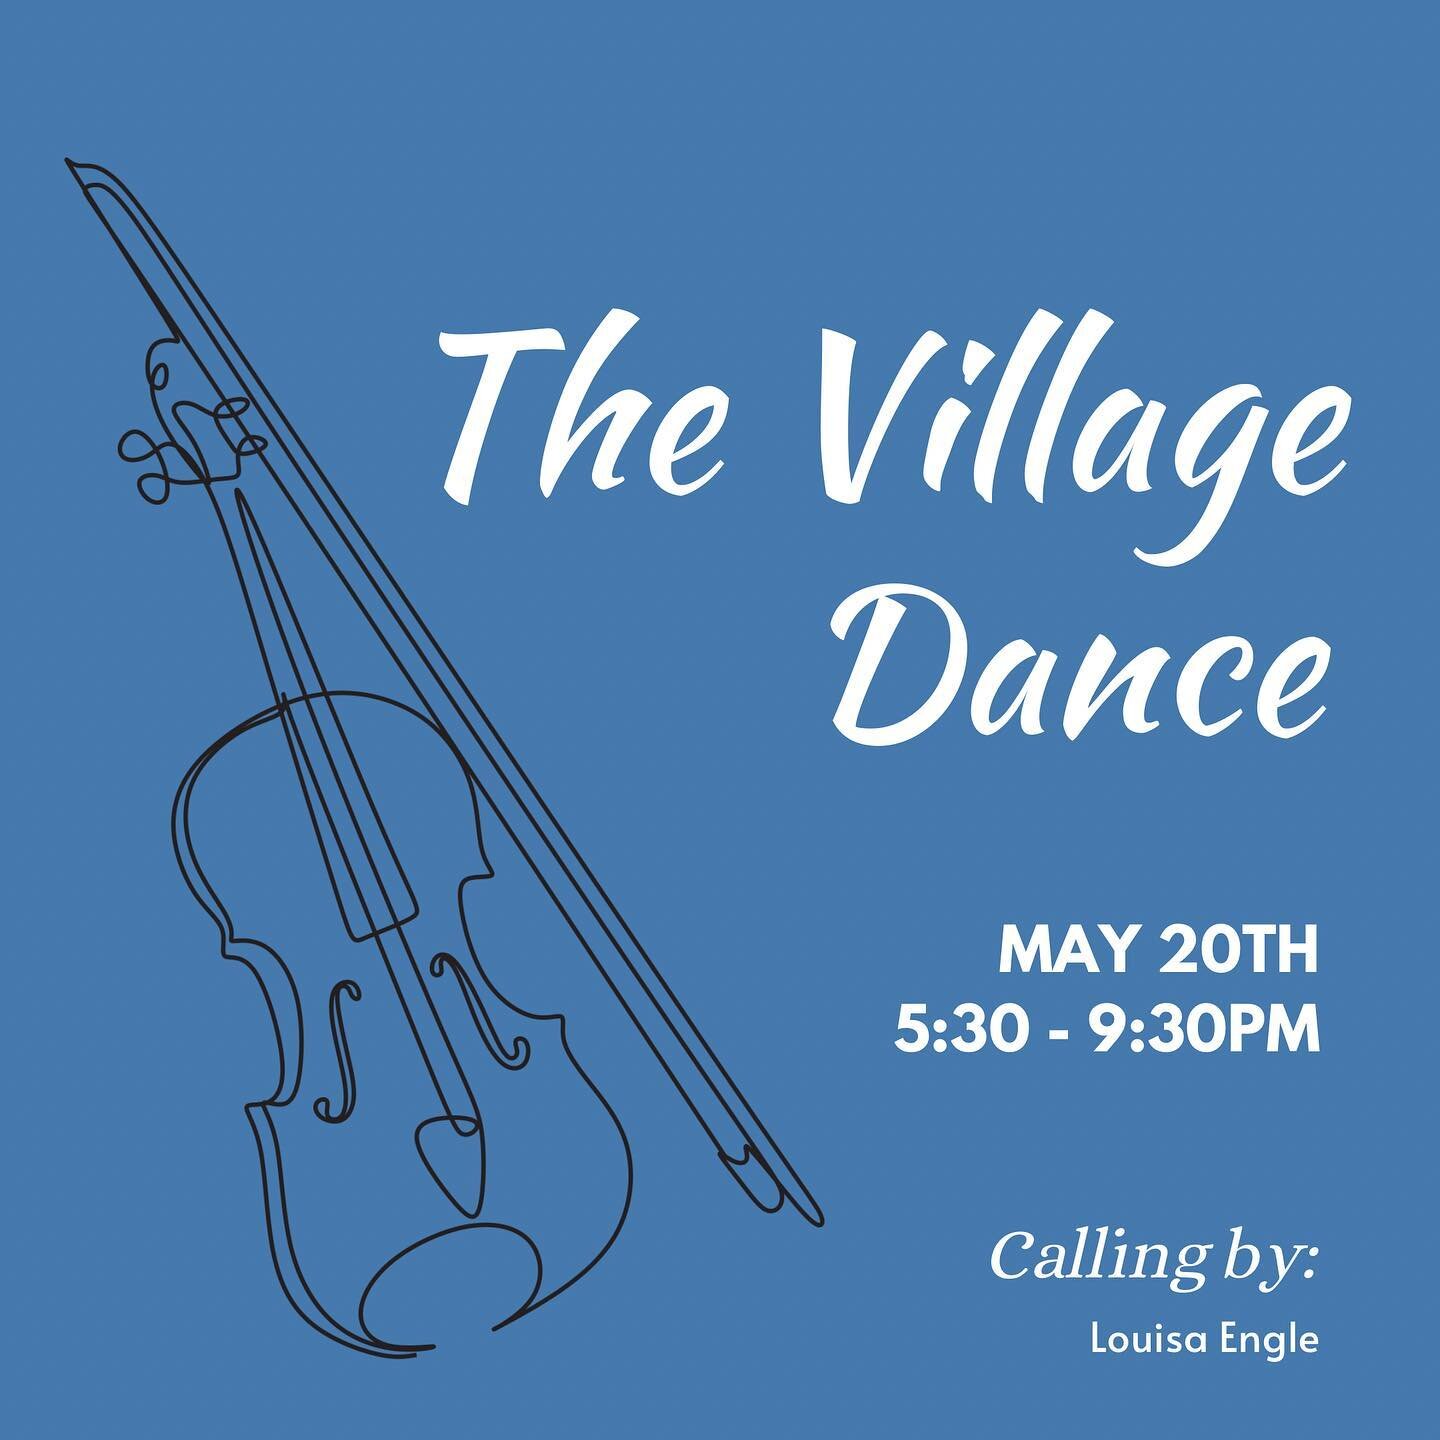 The next Village Dance will take place at the Broad Brook Community Center on Saturday, May 20!

Potluck at 5:30, dancing from 6:30-9:30. Live local music, open to anyone who wishes to dance, or to just come and listen.

The March and April Village D